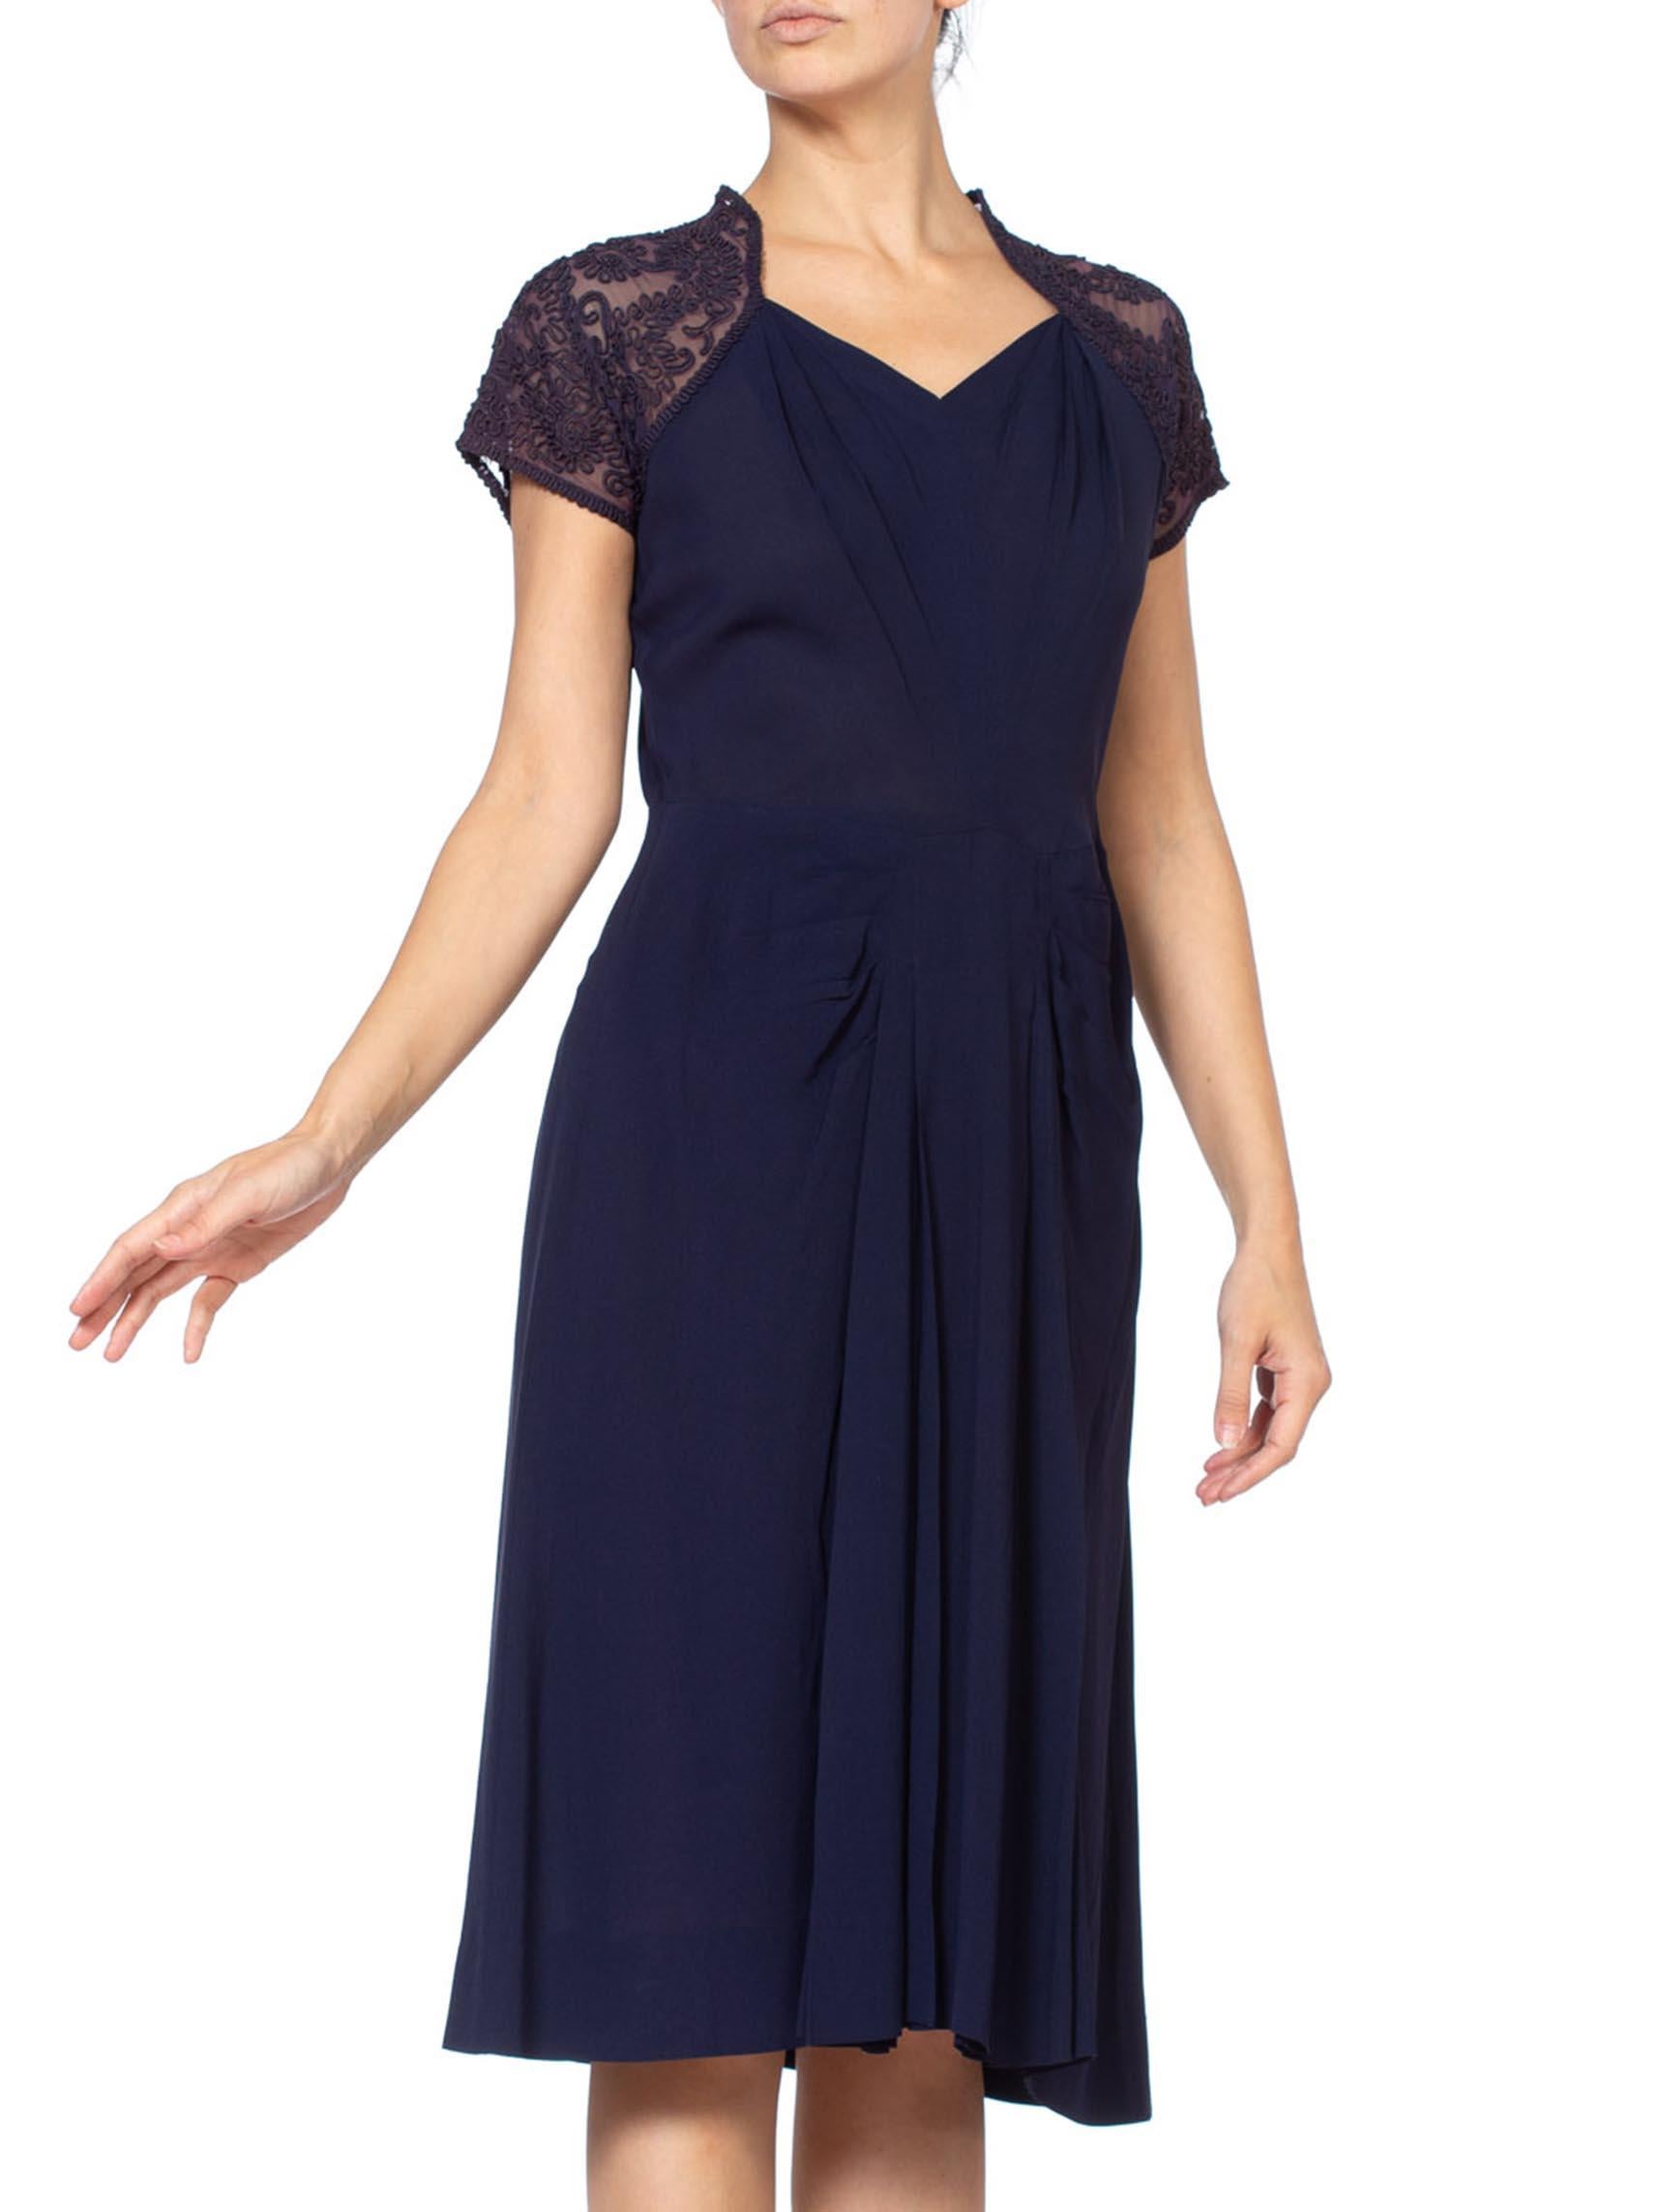 Women's 1940'S Navy Blue Rayon Crepe Dress With Embroidered Sheer Back For Sale